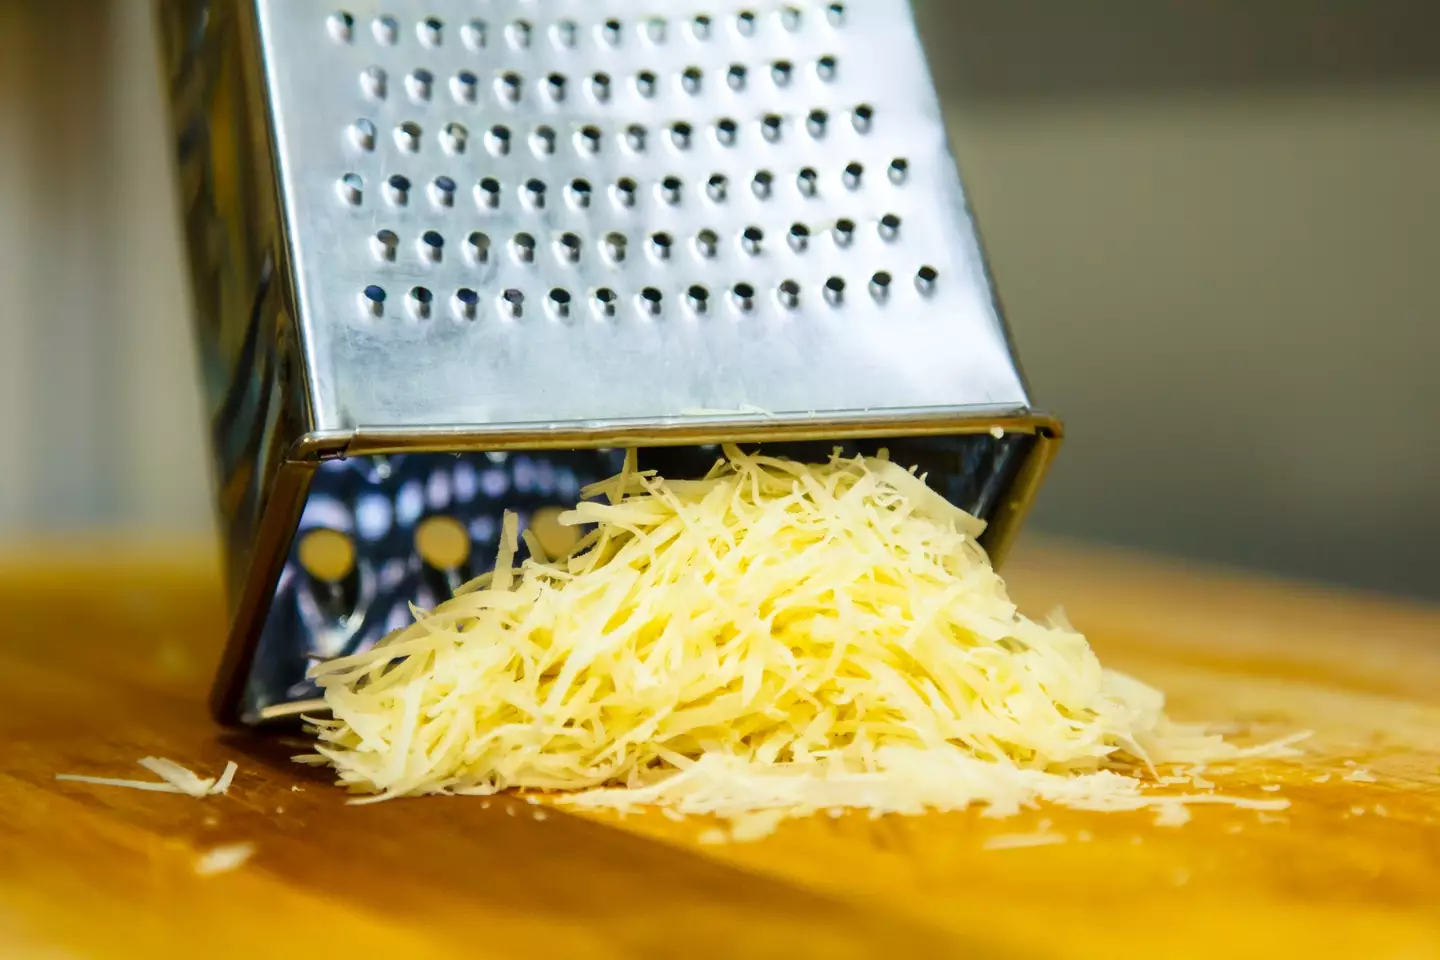 The fourth side of the cheese grater is used for very fine grating.